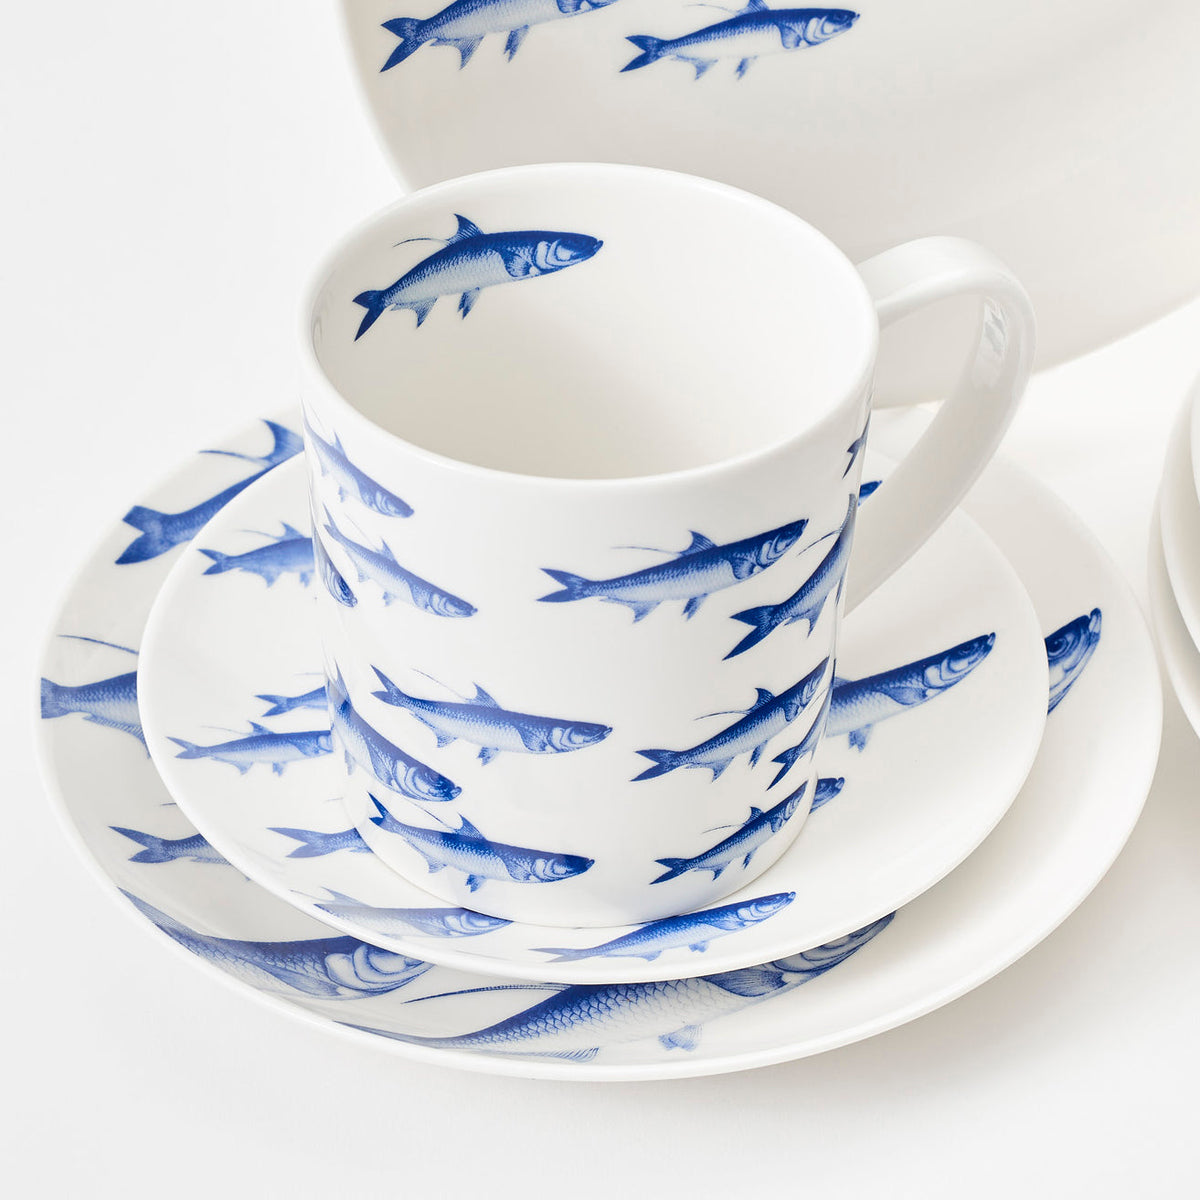 A set of School of Fish Mug-themed blue and white plates and cups from Caskata Artisanal Home.